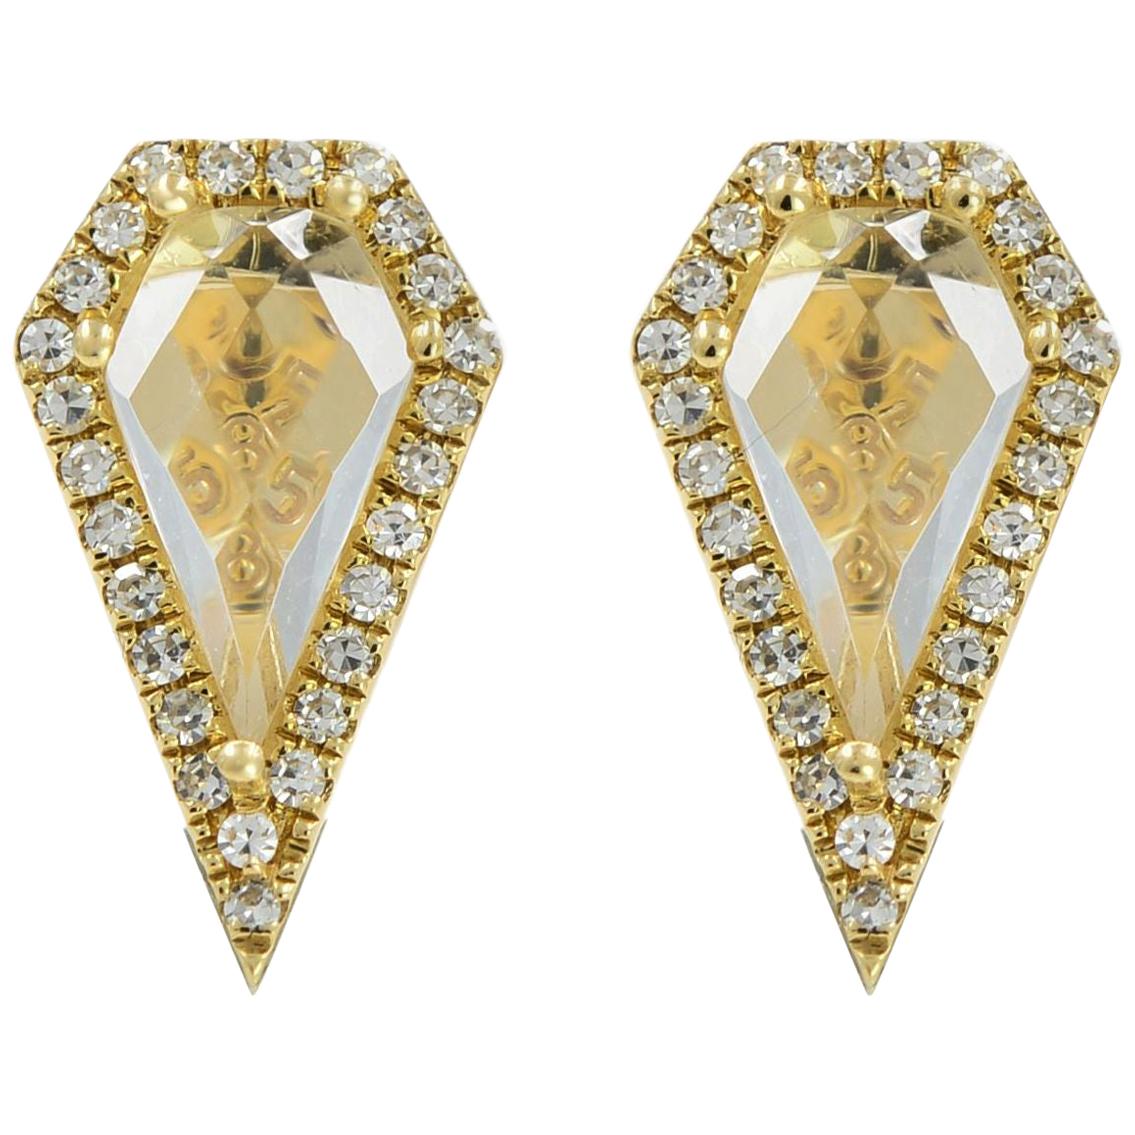 Brand new trendy jewelry with real gold and real diamonds. Beautiful stud earrings crafted in 14K yellow gold, feature a kite shaped center white topaz weighing 1.20cts with diamond accented halo weighing 0.12ct. Earring measurement: Height: 11.6mm;